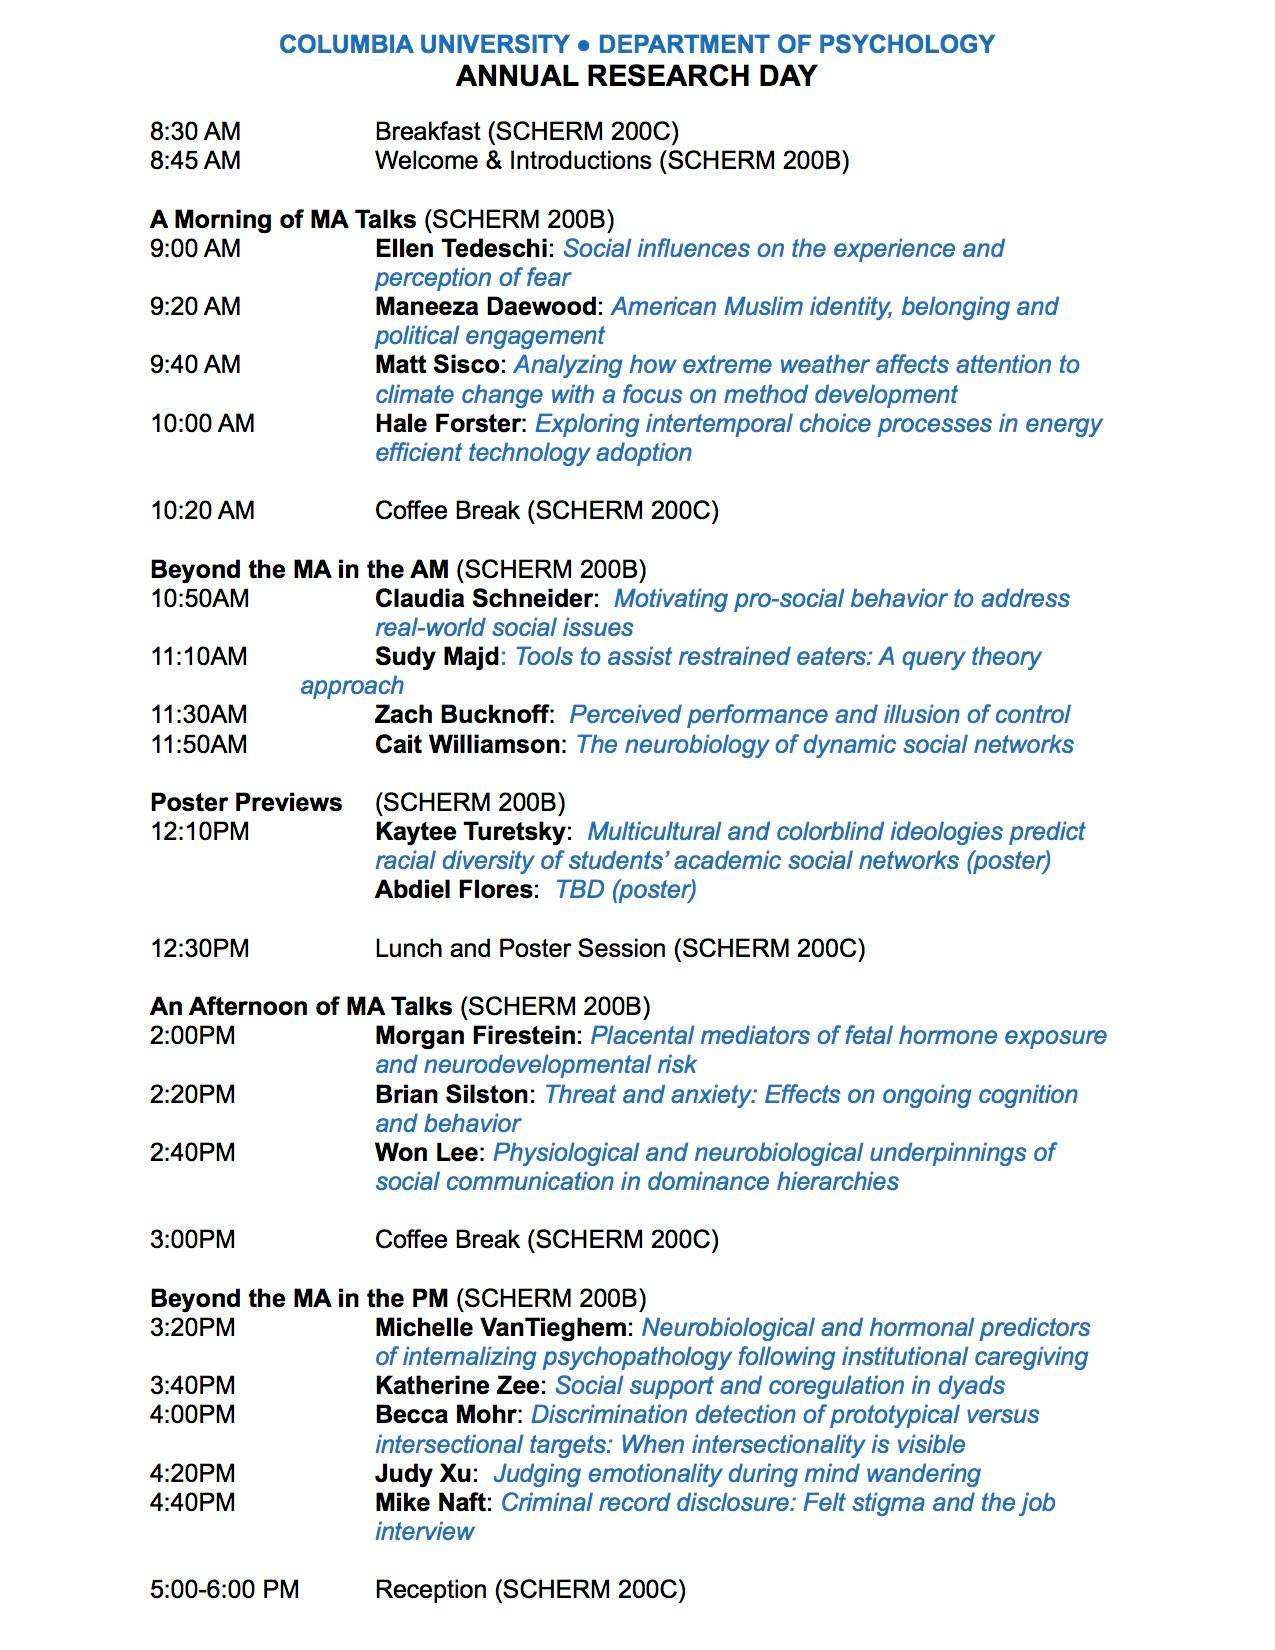 Research Day Schedule 